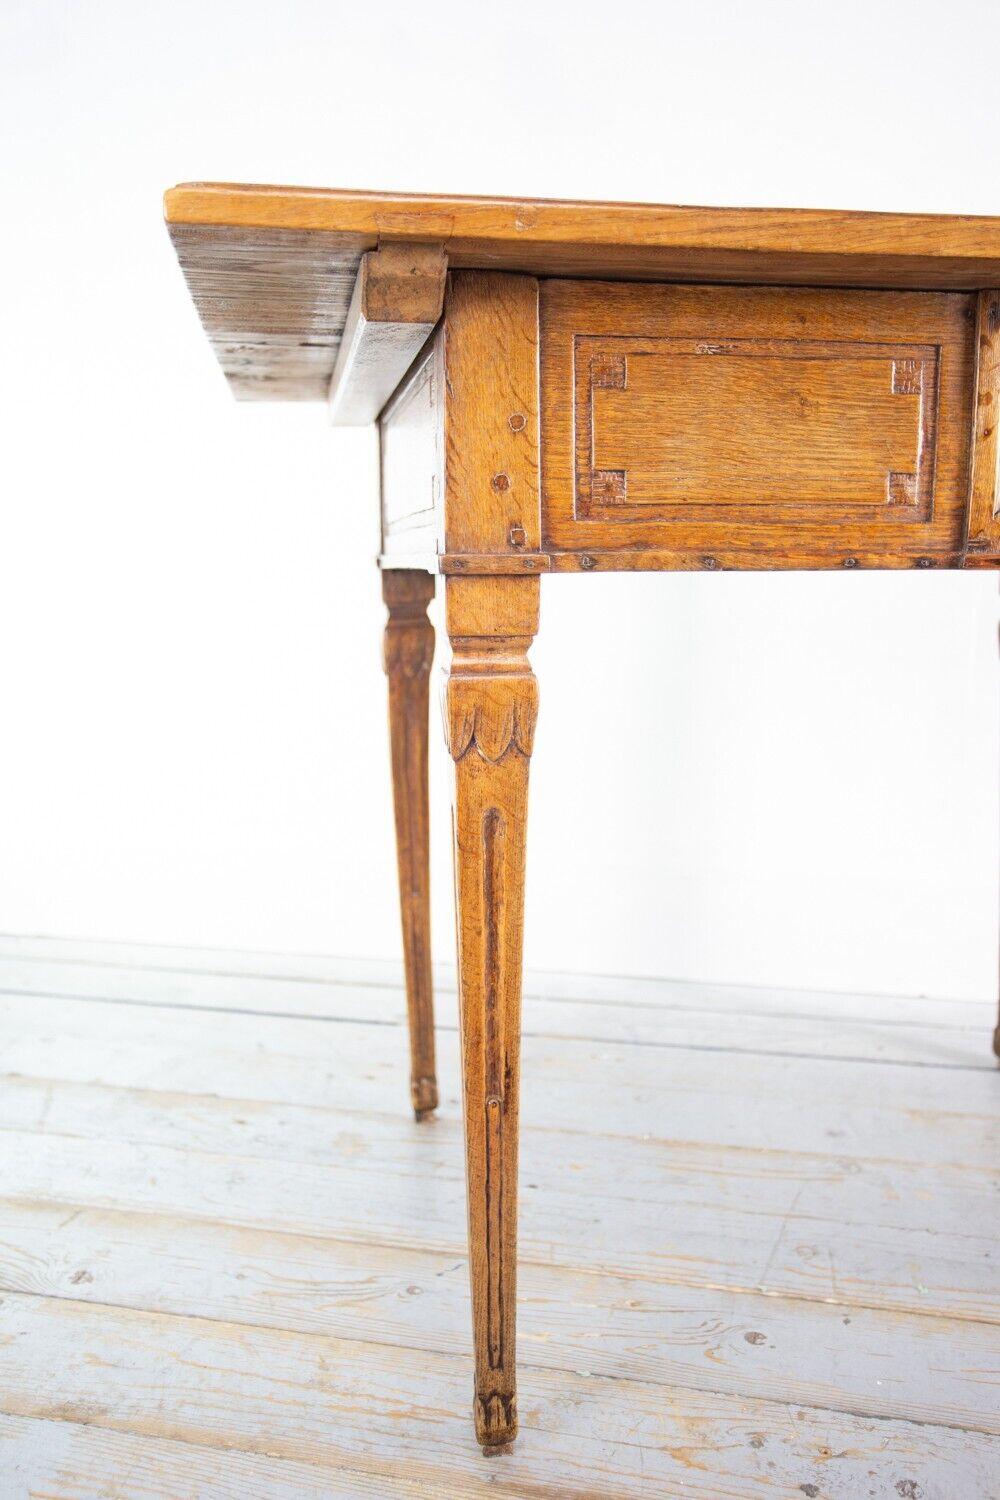 Antique Rustic Table

Oak side table with one long drawer, pegged in places, a two plank top and detailed carvings on the legs. Would make a nice crafting table, or for displaying items such as vases, photo frames, etcetera. 

Continental with